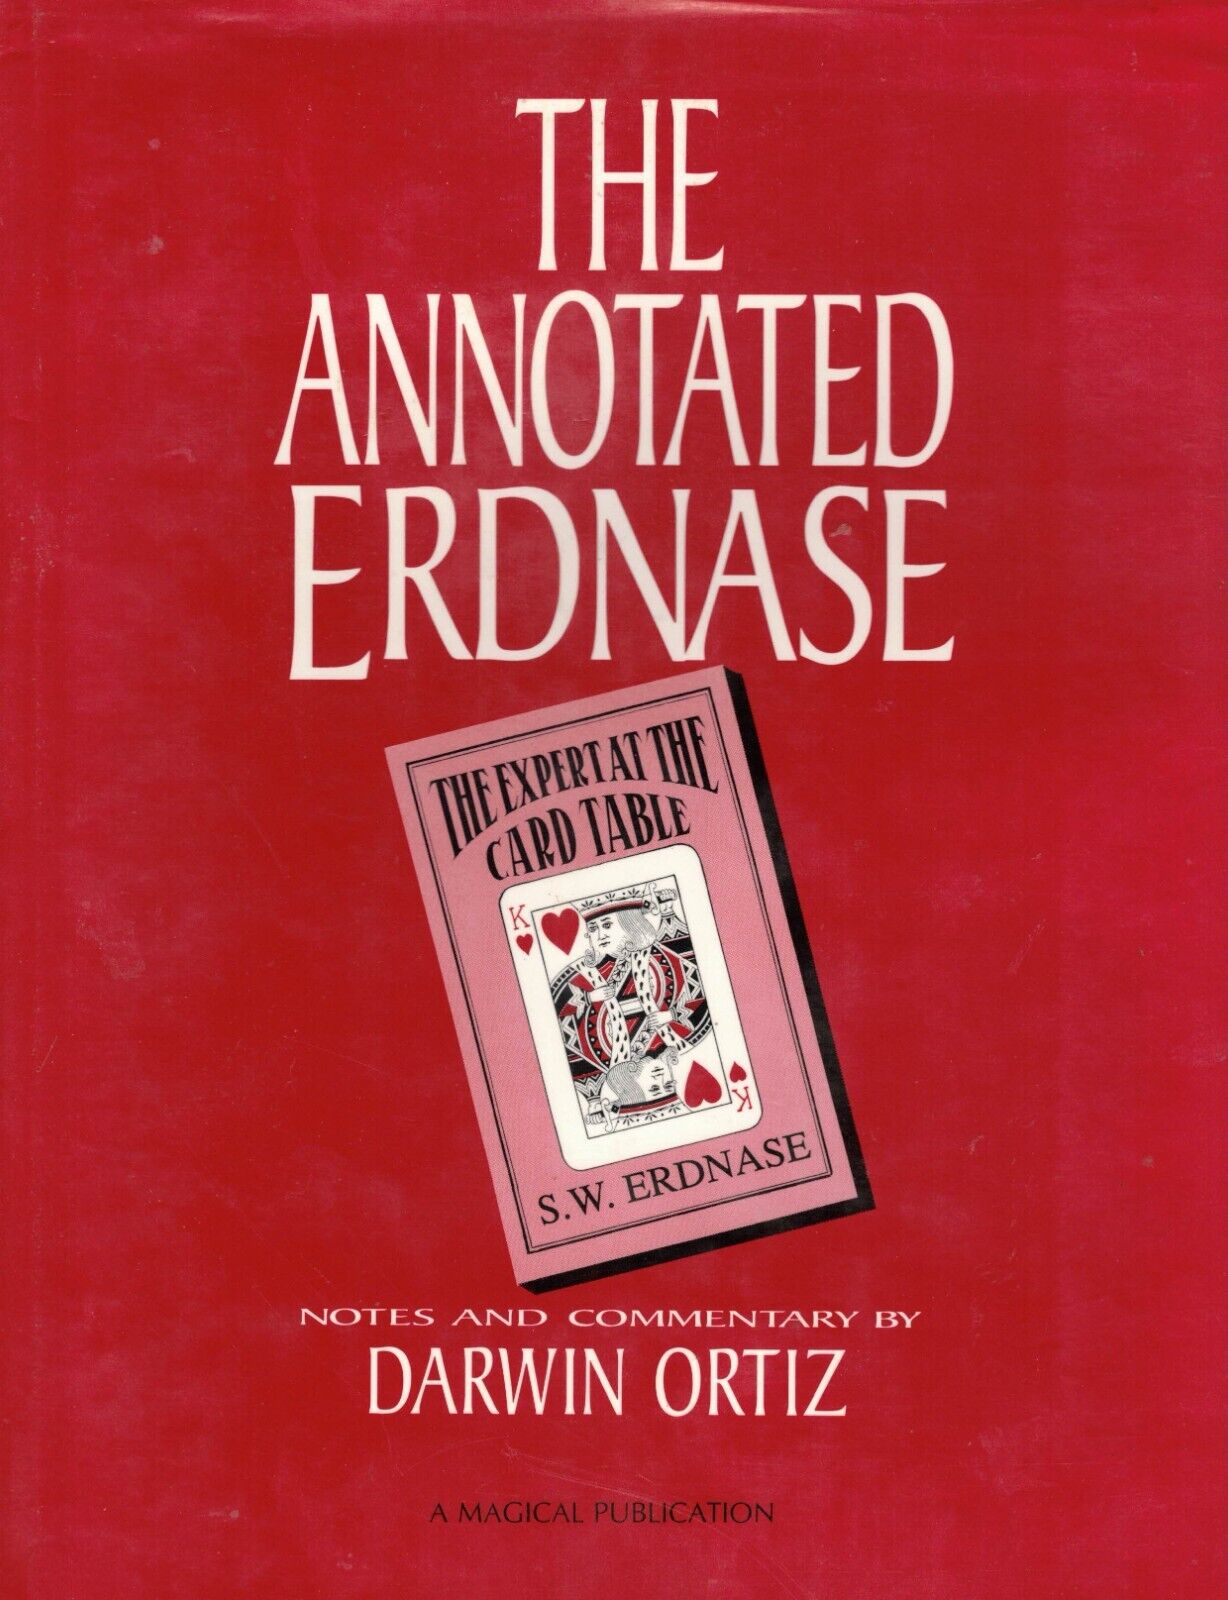 The Annotated Erdnase by Darwin Ortiz, 1991